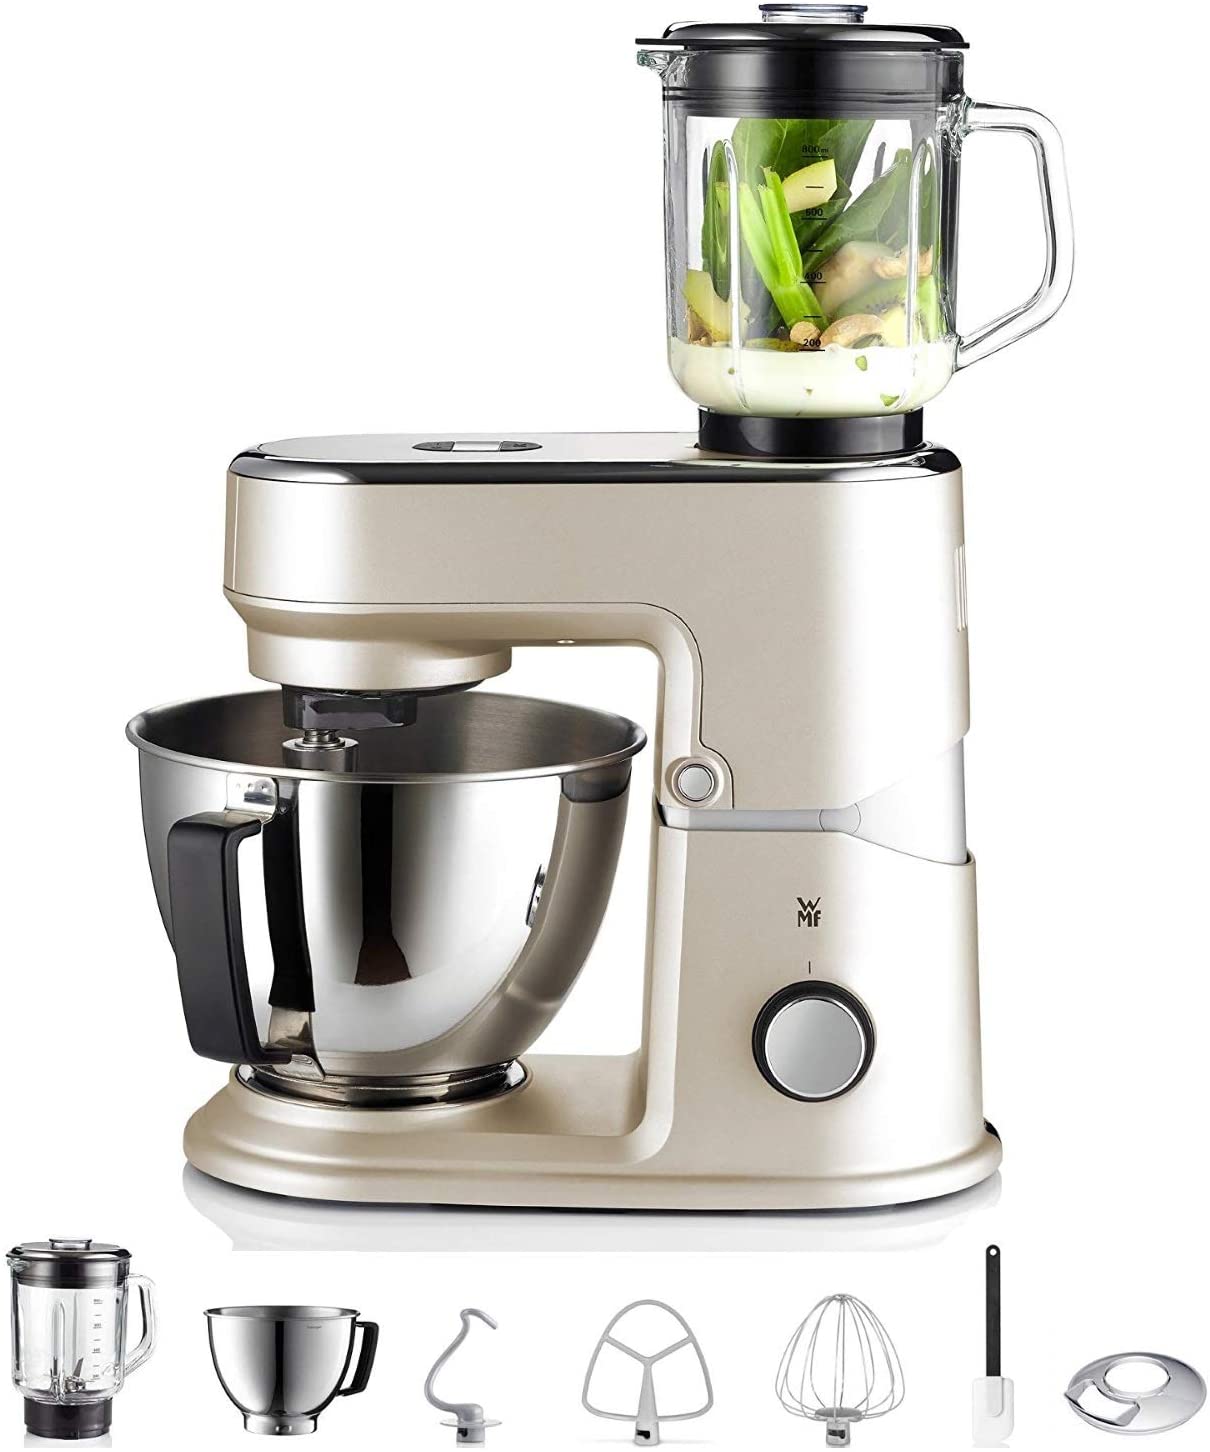 WMF Küchenminis food processor One for All (430 watts, Cromargan mixing bowl 3 L, planetary stirrer, timer function, including glass mixer attachment for smoothies and Co.) powder rose